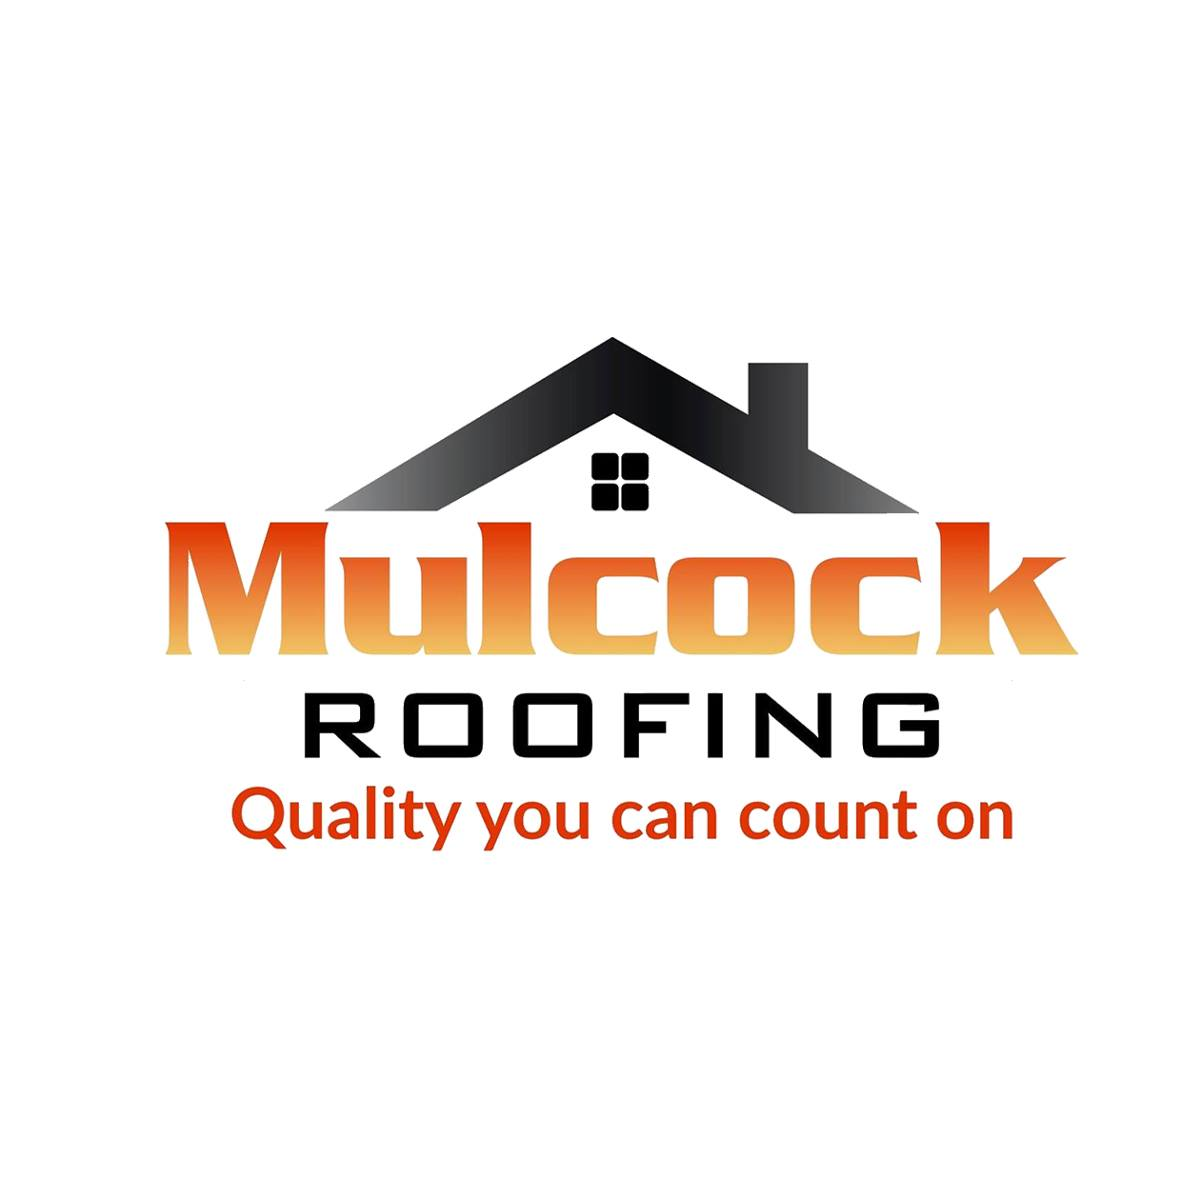 Mulcock Roofing